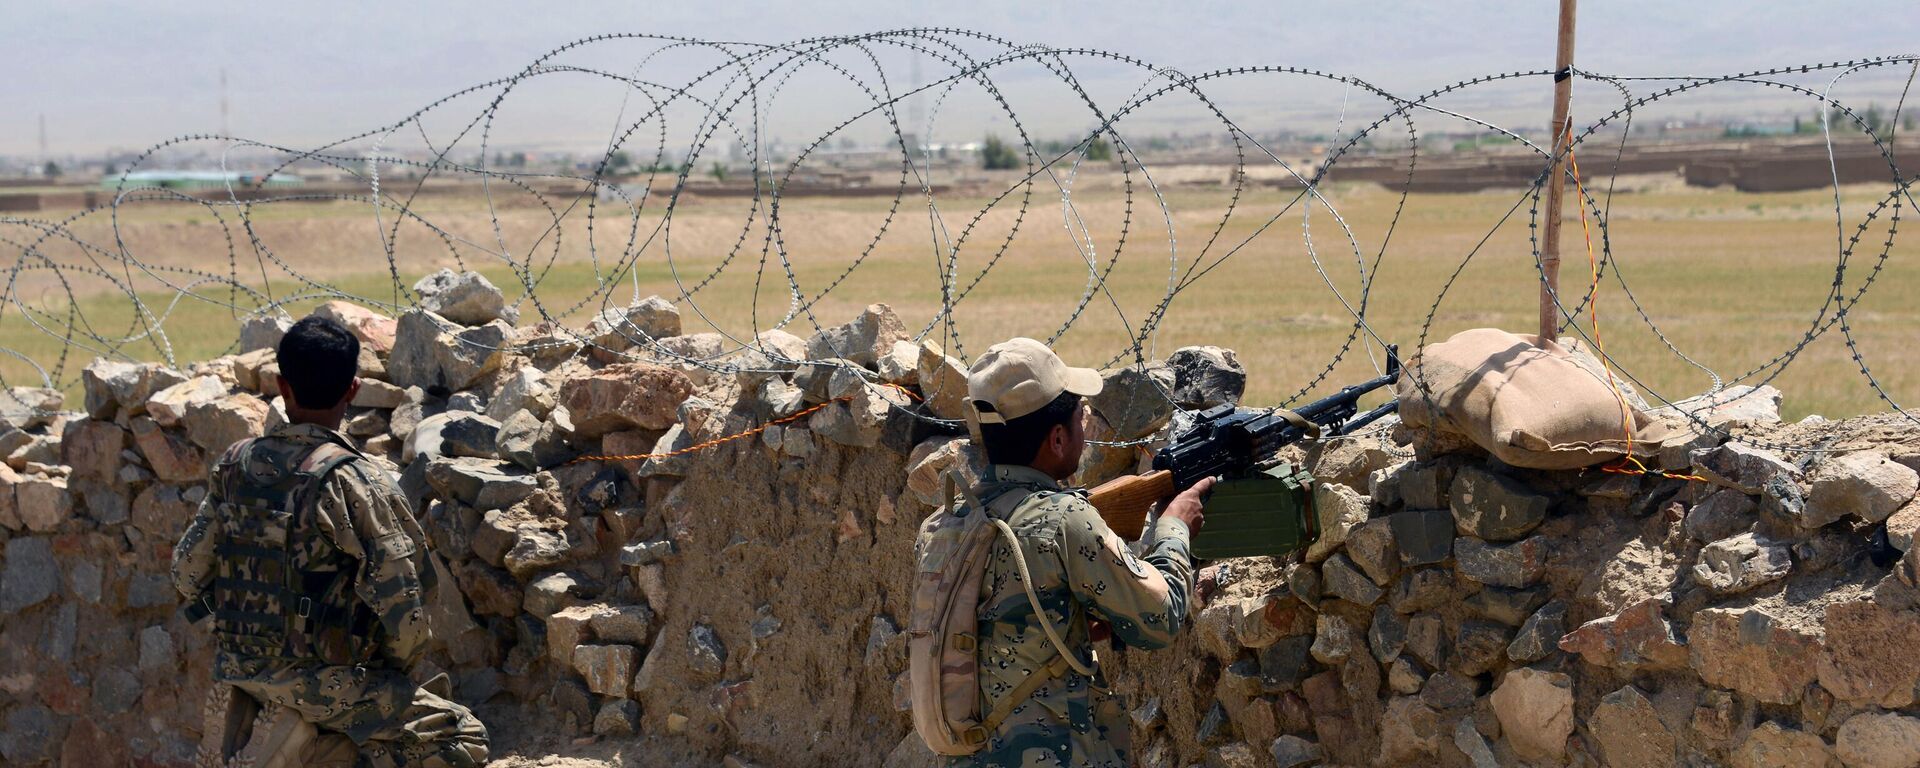 Afghan Border Police personnel keep watch during an ongoing battle between Pakistani and Afghan Border forces near the Durand line at Spin Boldak, in southern Kandahar province on May 5, 2017. Pakistani and Afghan officials have accused each other of killing civilians after gunfire erupted near a major border crossing where Pakistani census officials were carrying out a count, exacerbating tensions between the neighbours. (Photo by JAVED TANVEER / AFP) - Sputnik India, 1920, 28.03.2024